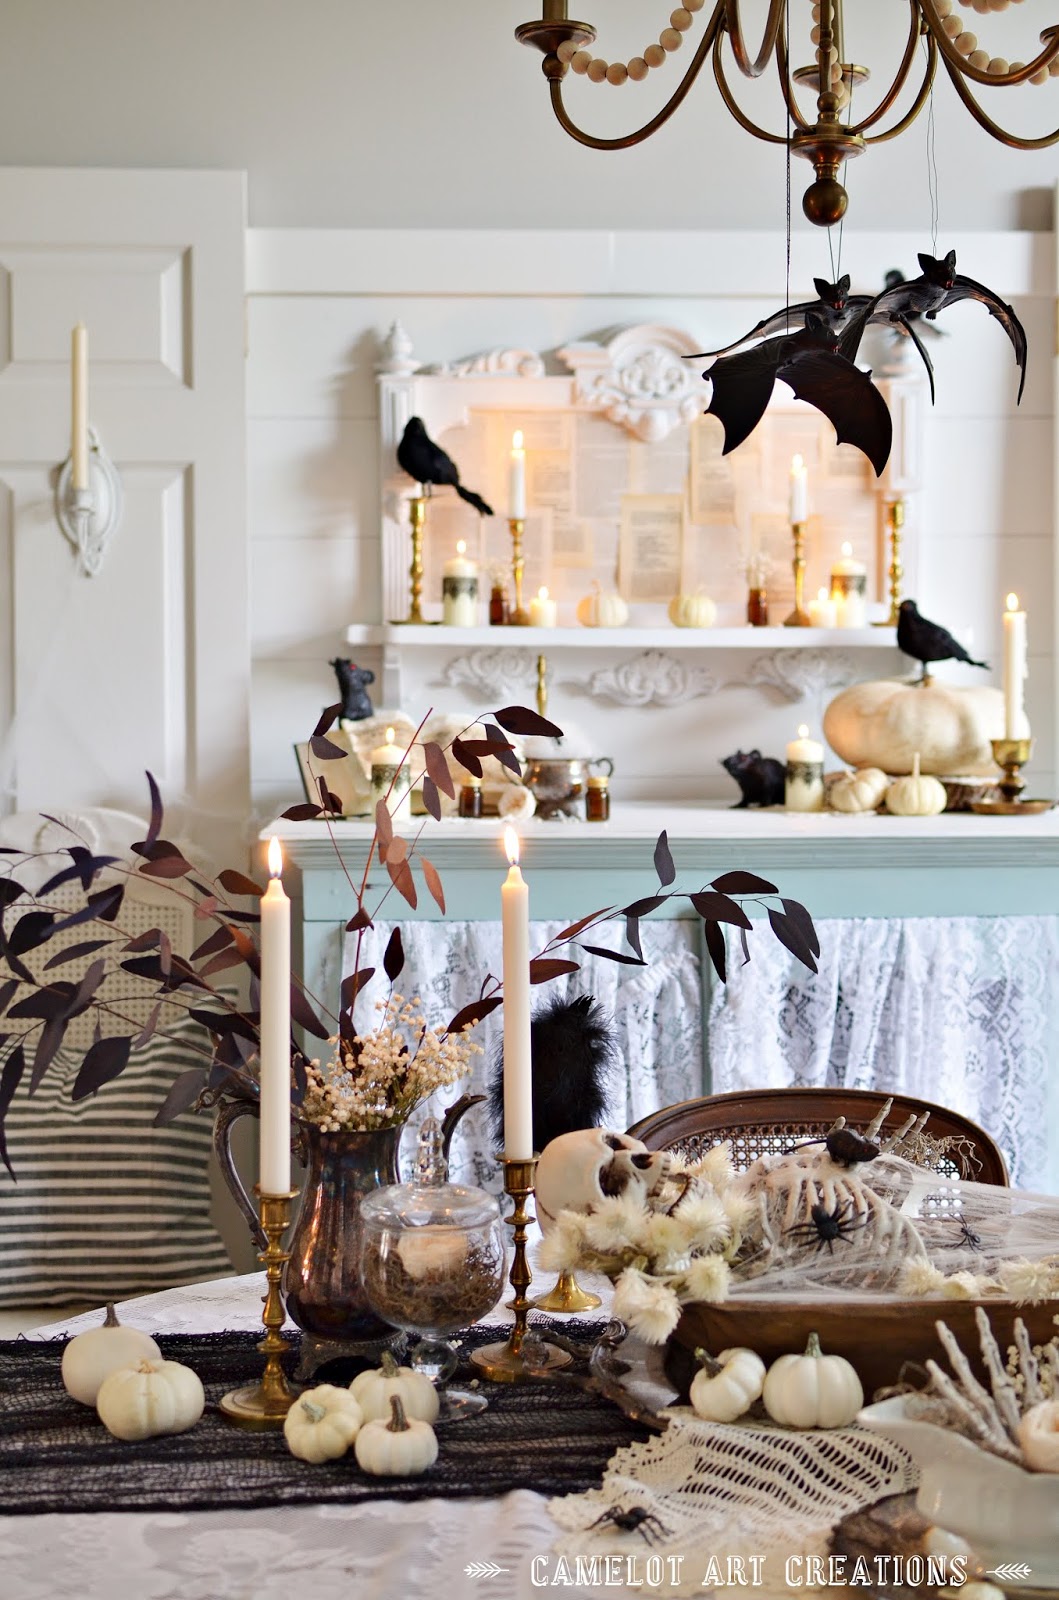 Camelot Art Creations: Vintage Chic Halloween Tablescape: Halloween ...